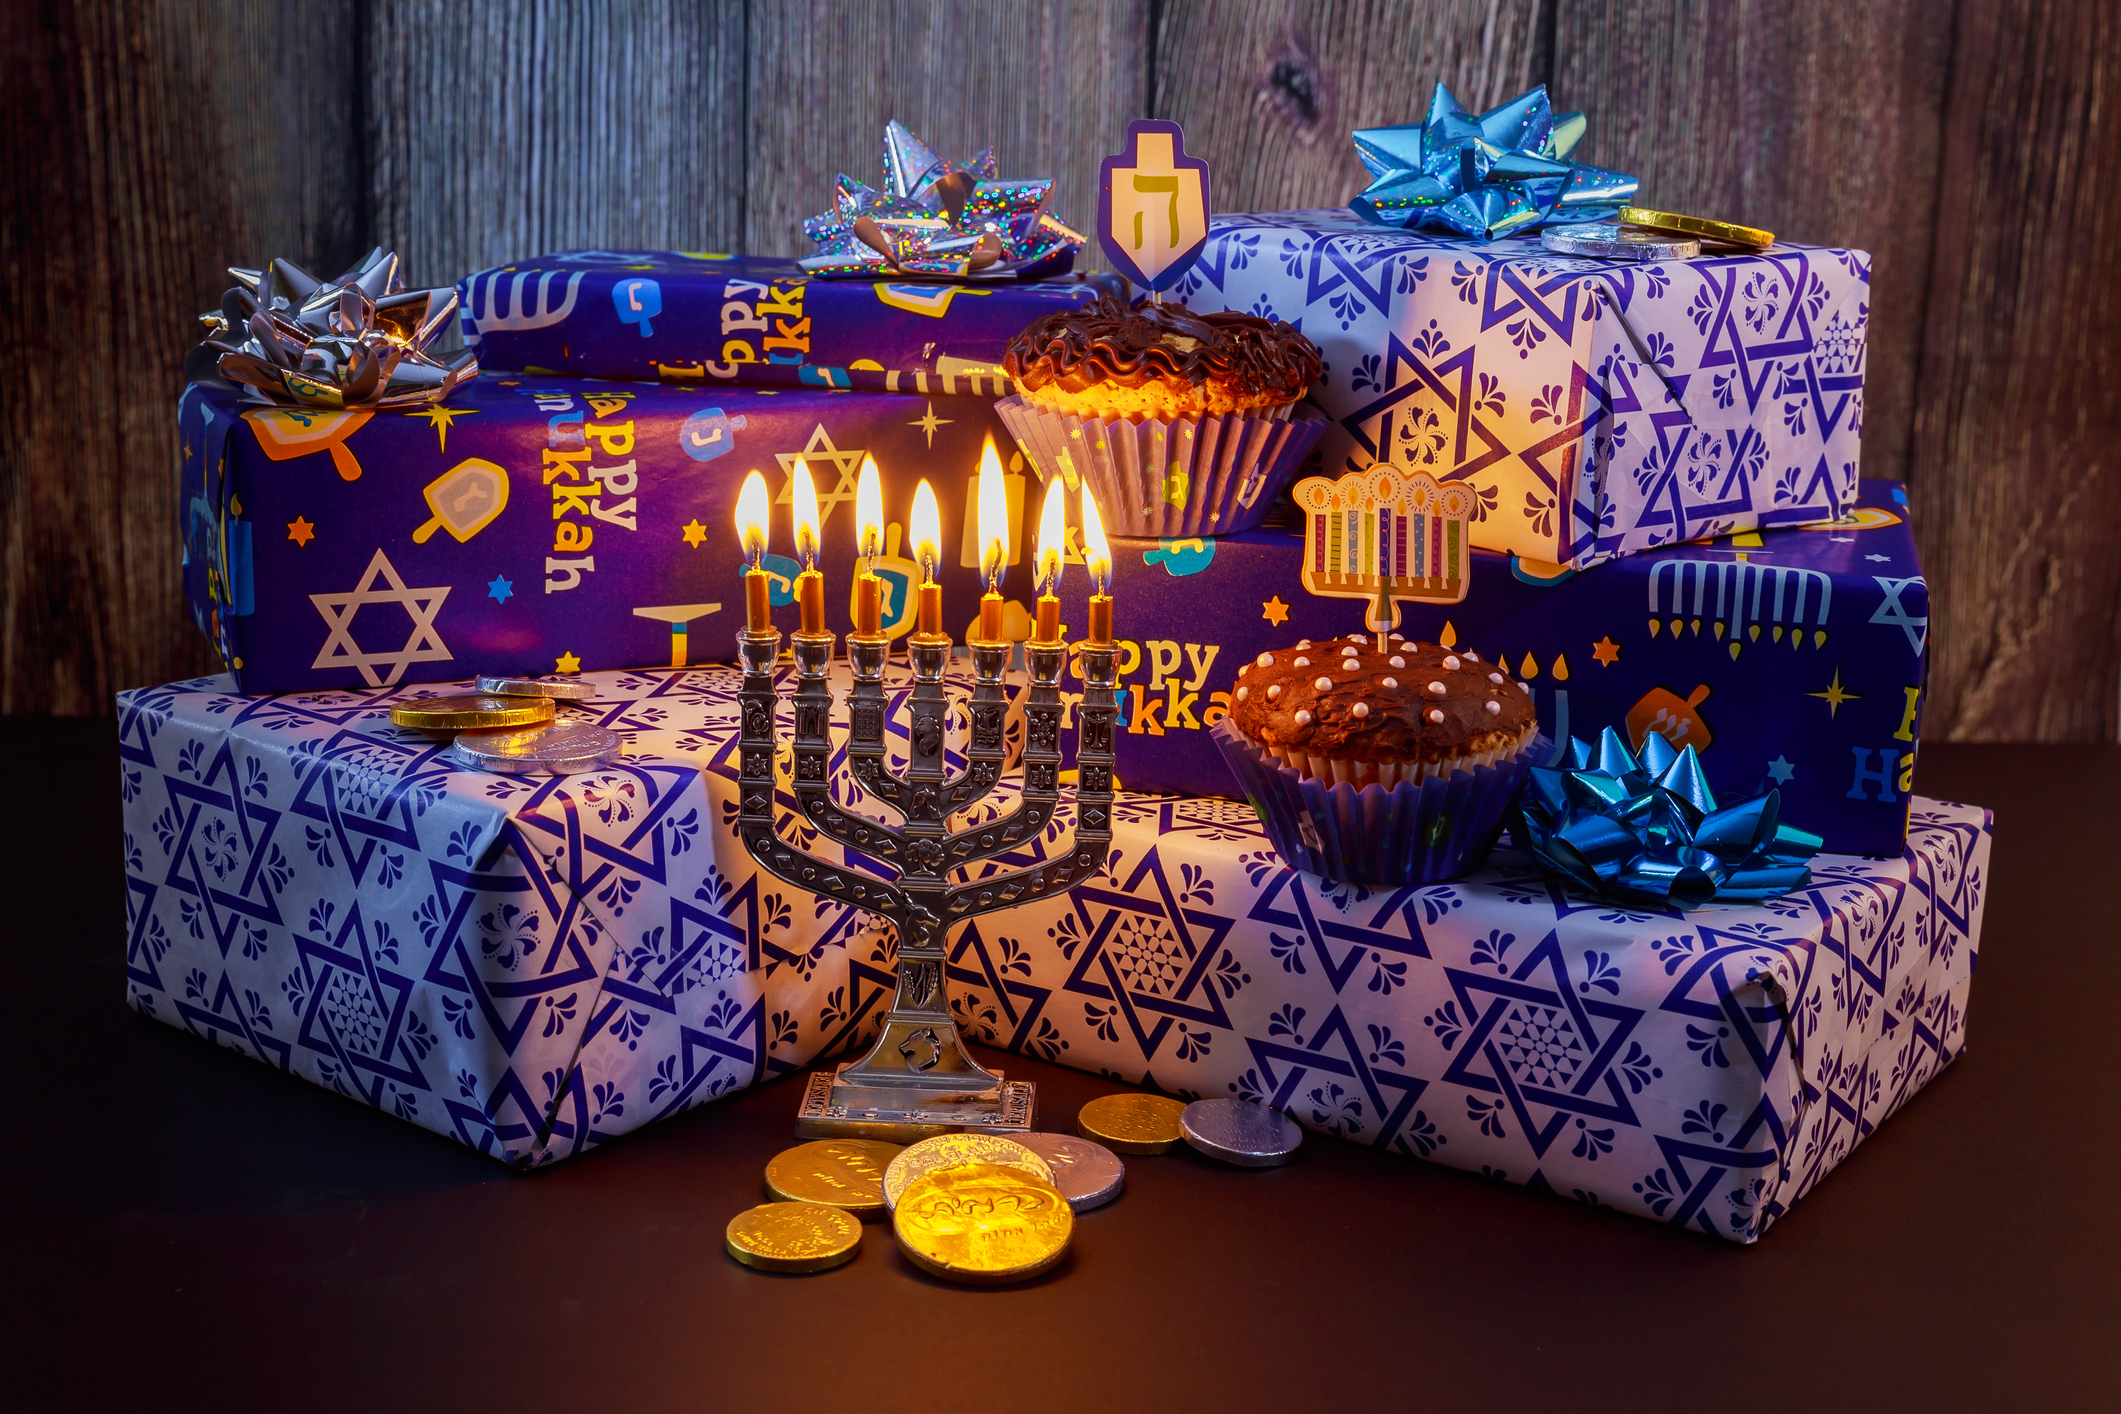 Are Gifts Given for Hanukkah 